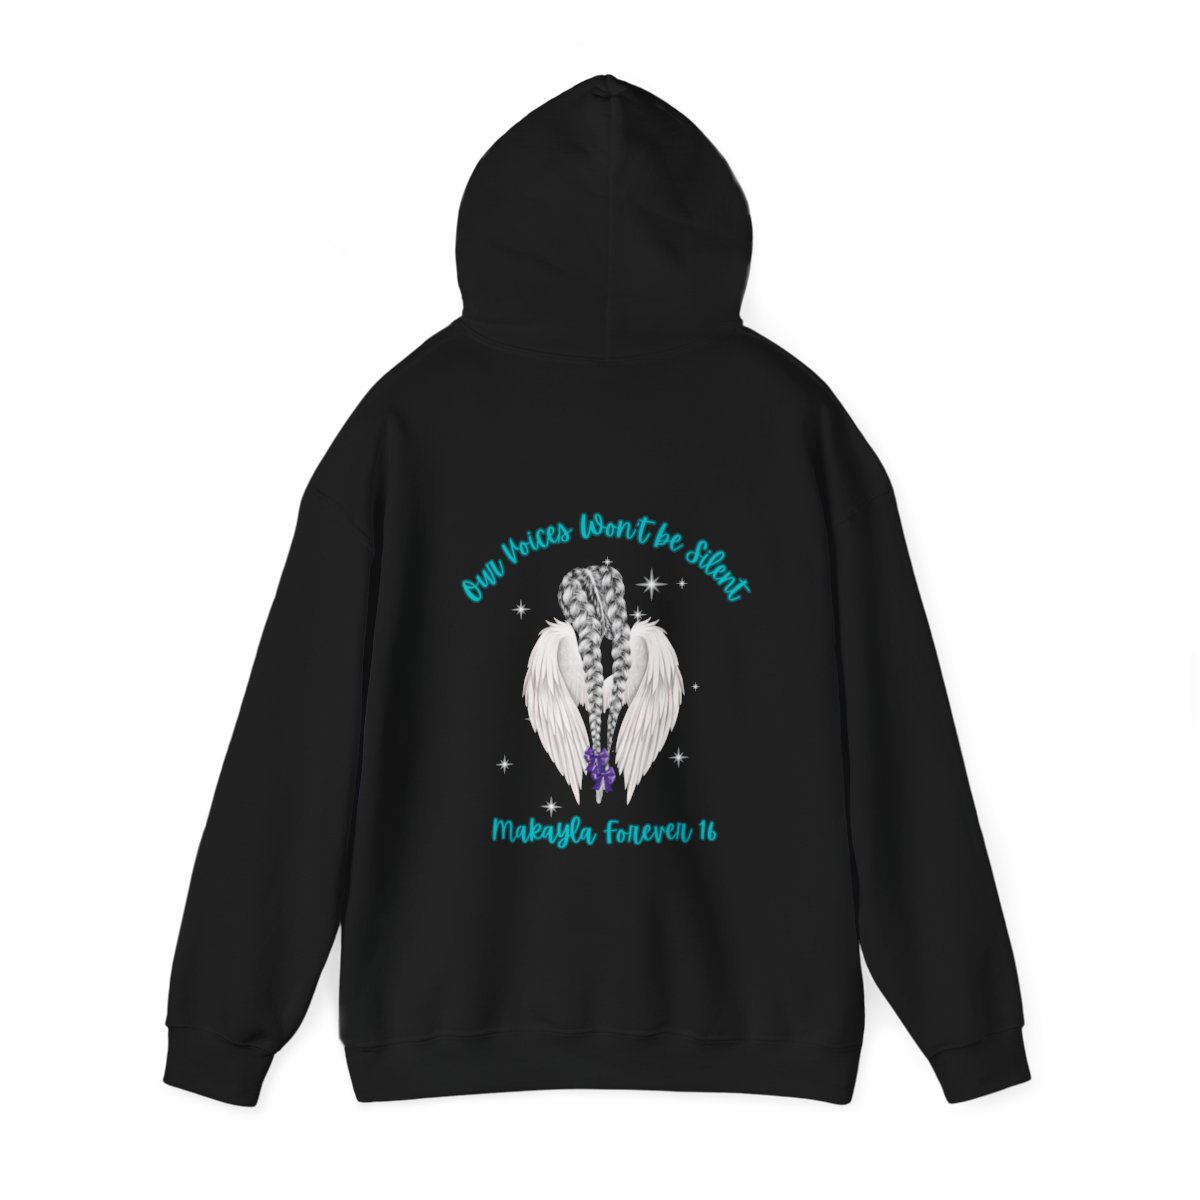 Our Voices - Unisex Hooded Sweatshirt product thumbnail image